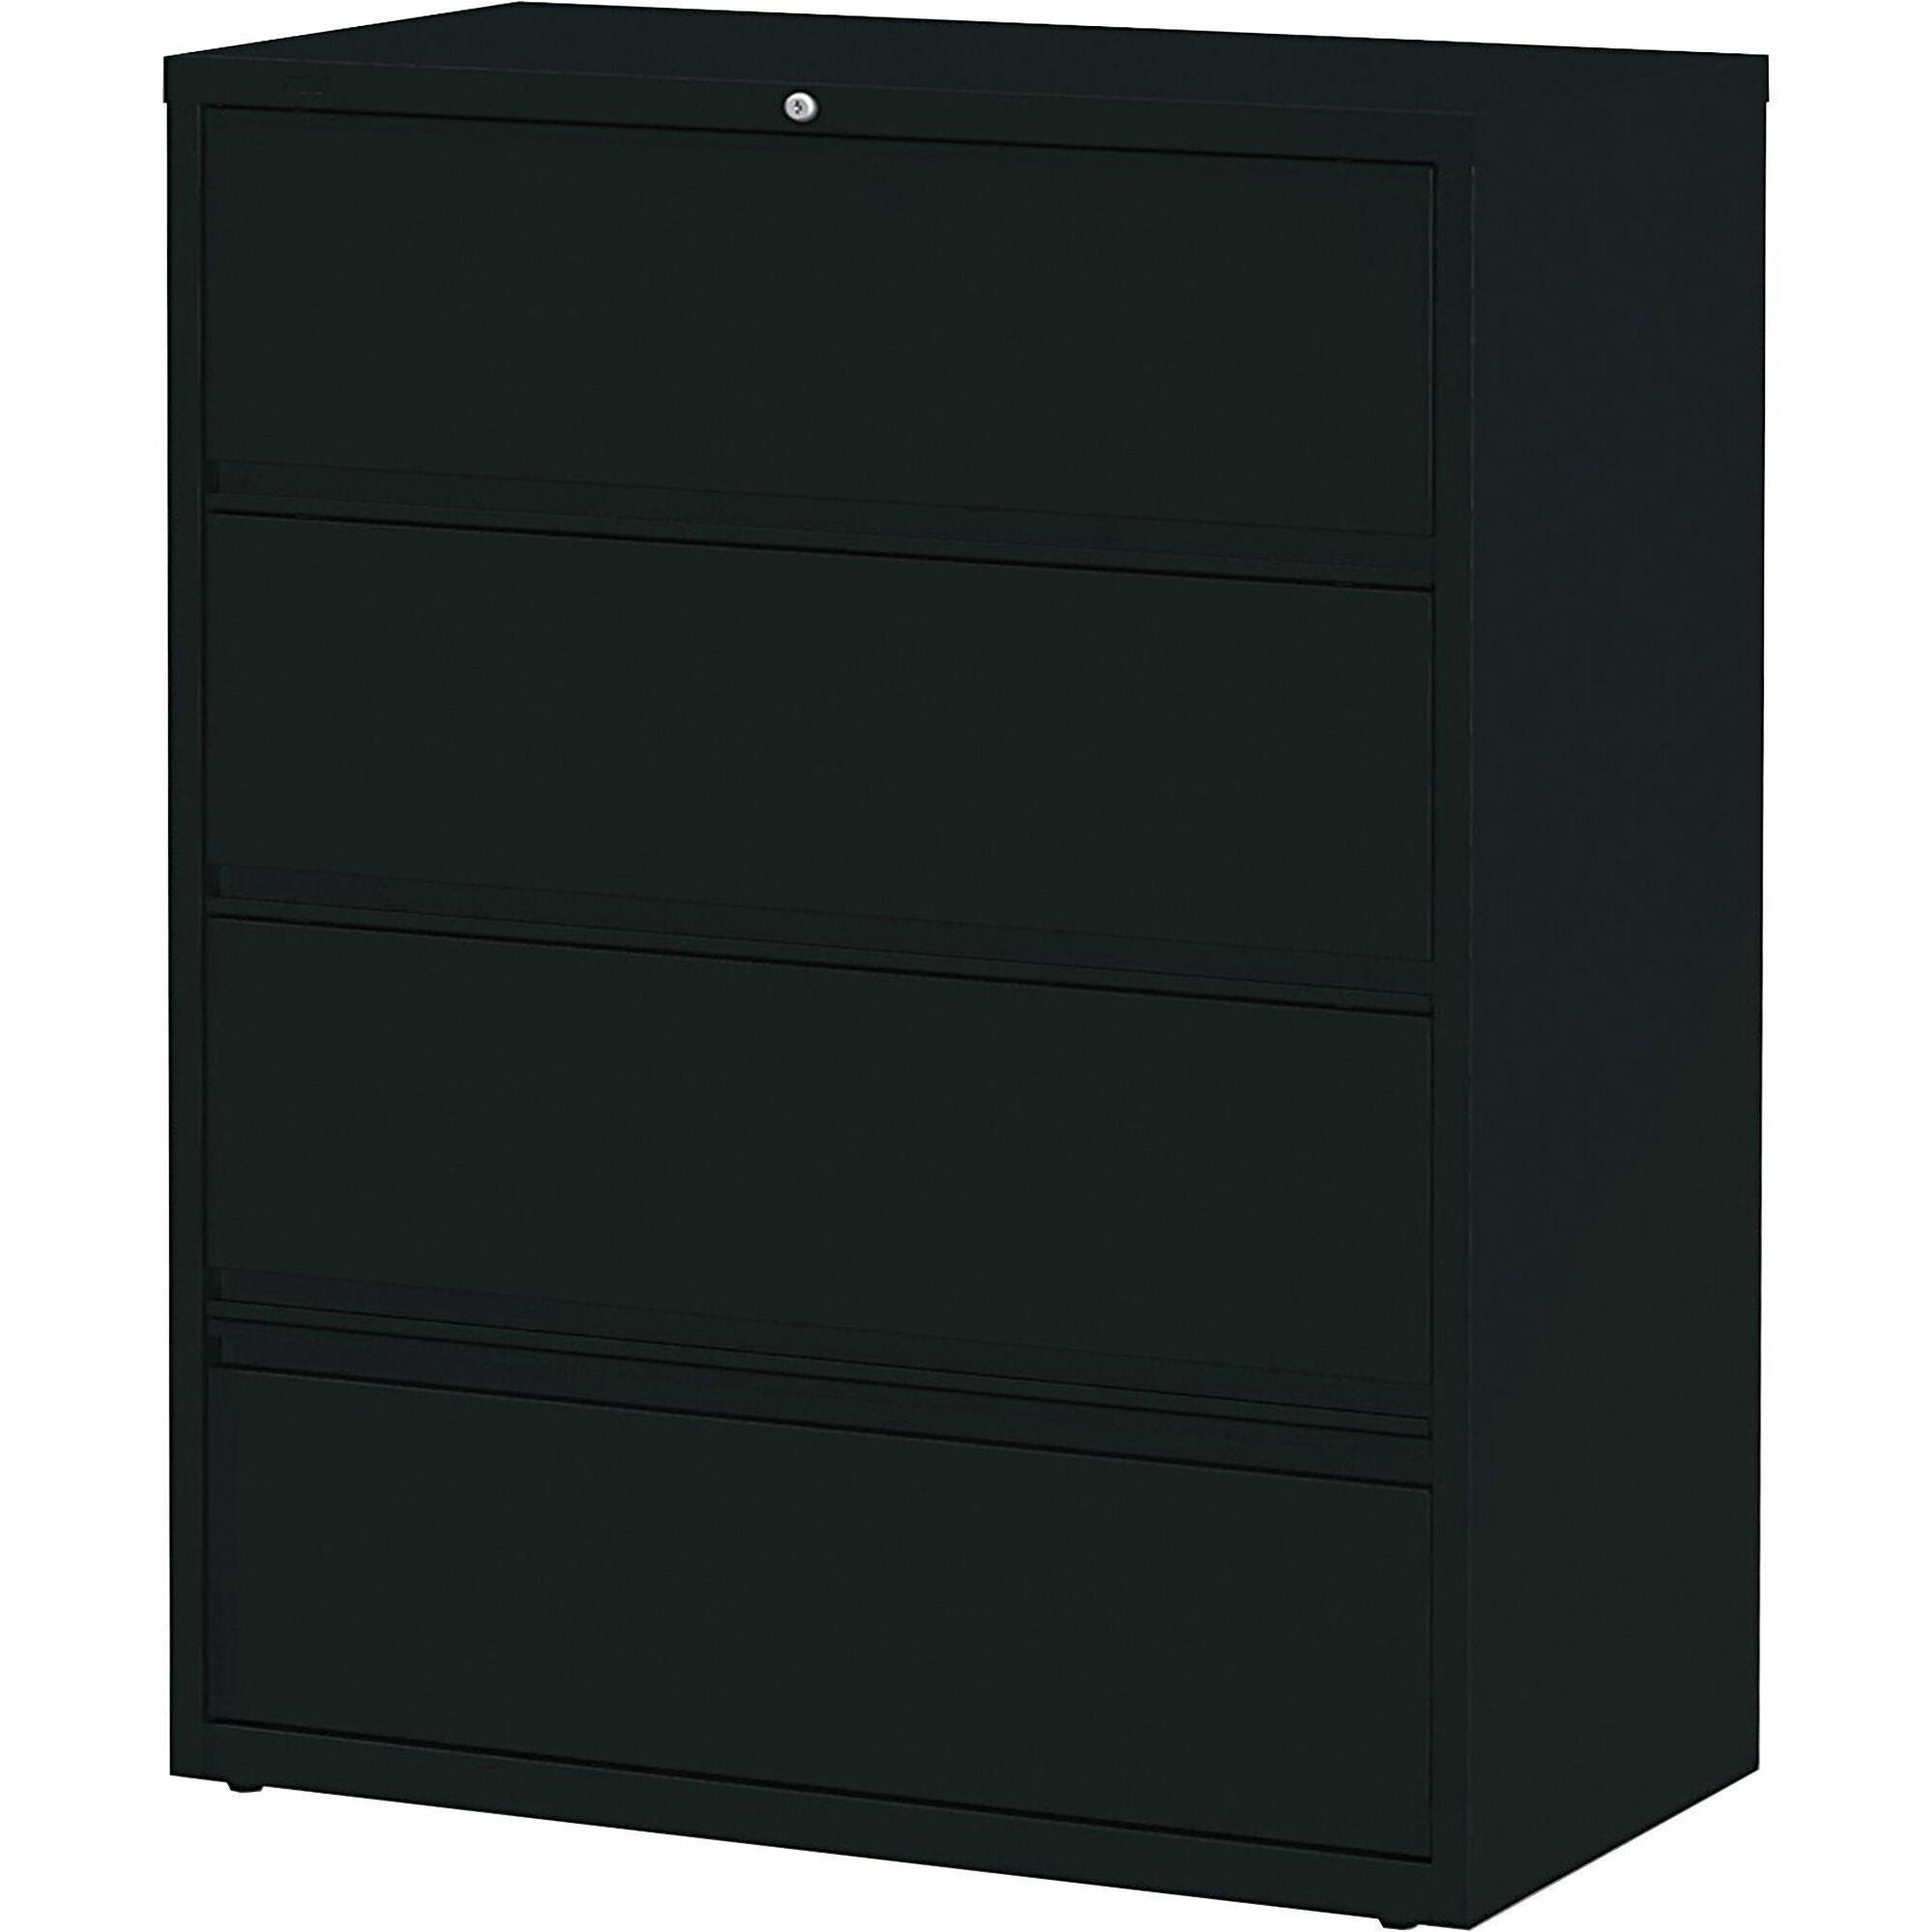 Lorell Fortress Lateral File with Roll-Out Shelf - 42" x 18.6" x 52.5" - 4 x Drawer(s) for File - Letter, A4, Legal - Leveling Glide, Heavy Duty, Recessed Handle, Ball-bearing Suspension, Interlocking - Black - Metal - Recycled - 1